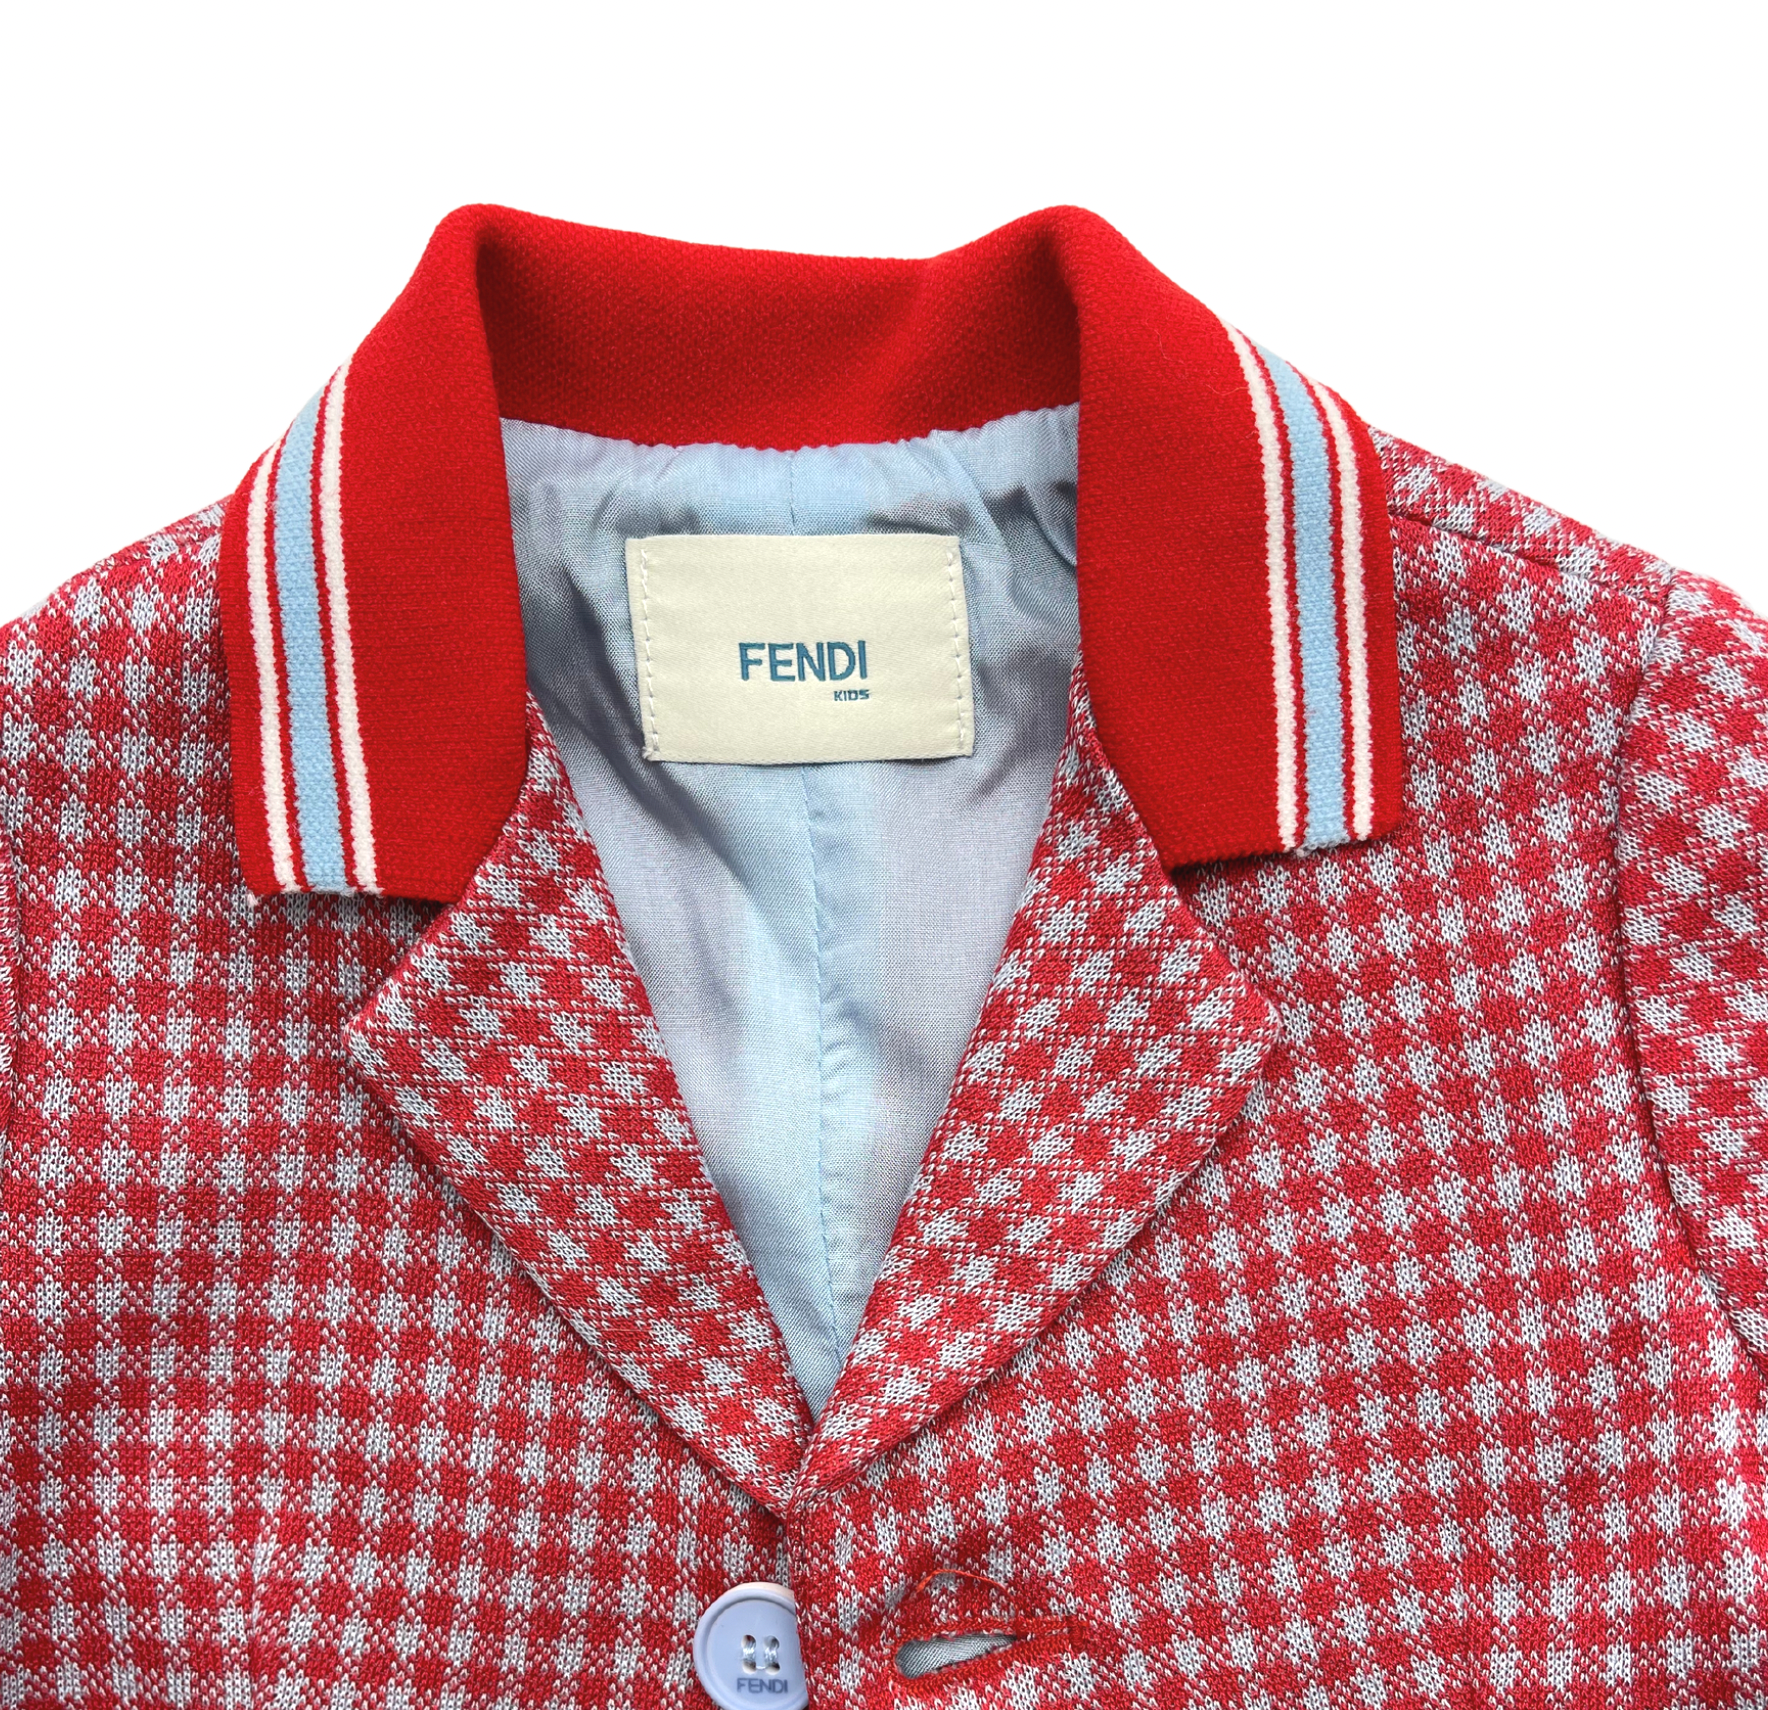 FENDI - Red checked jacket - 3 months